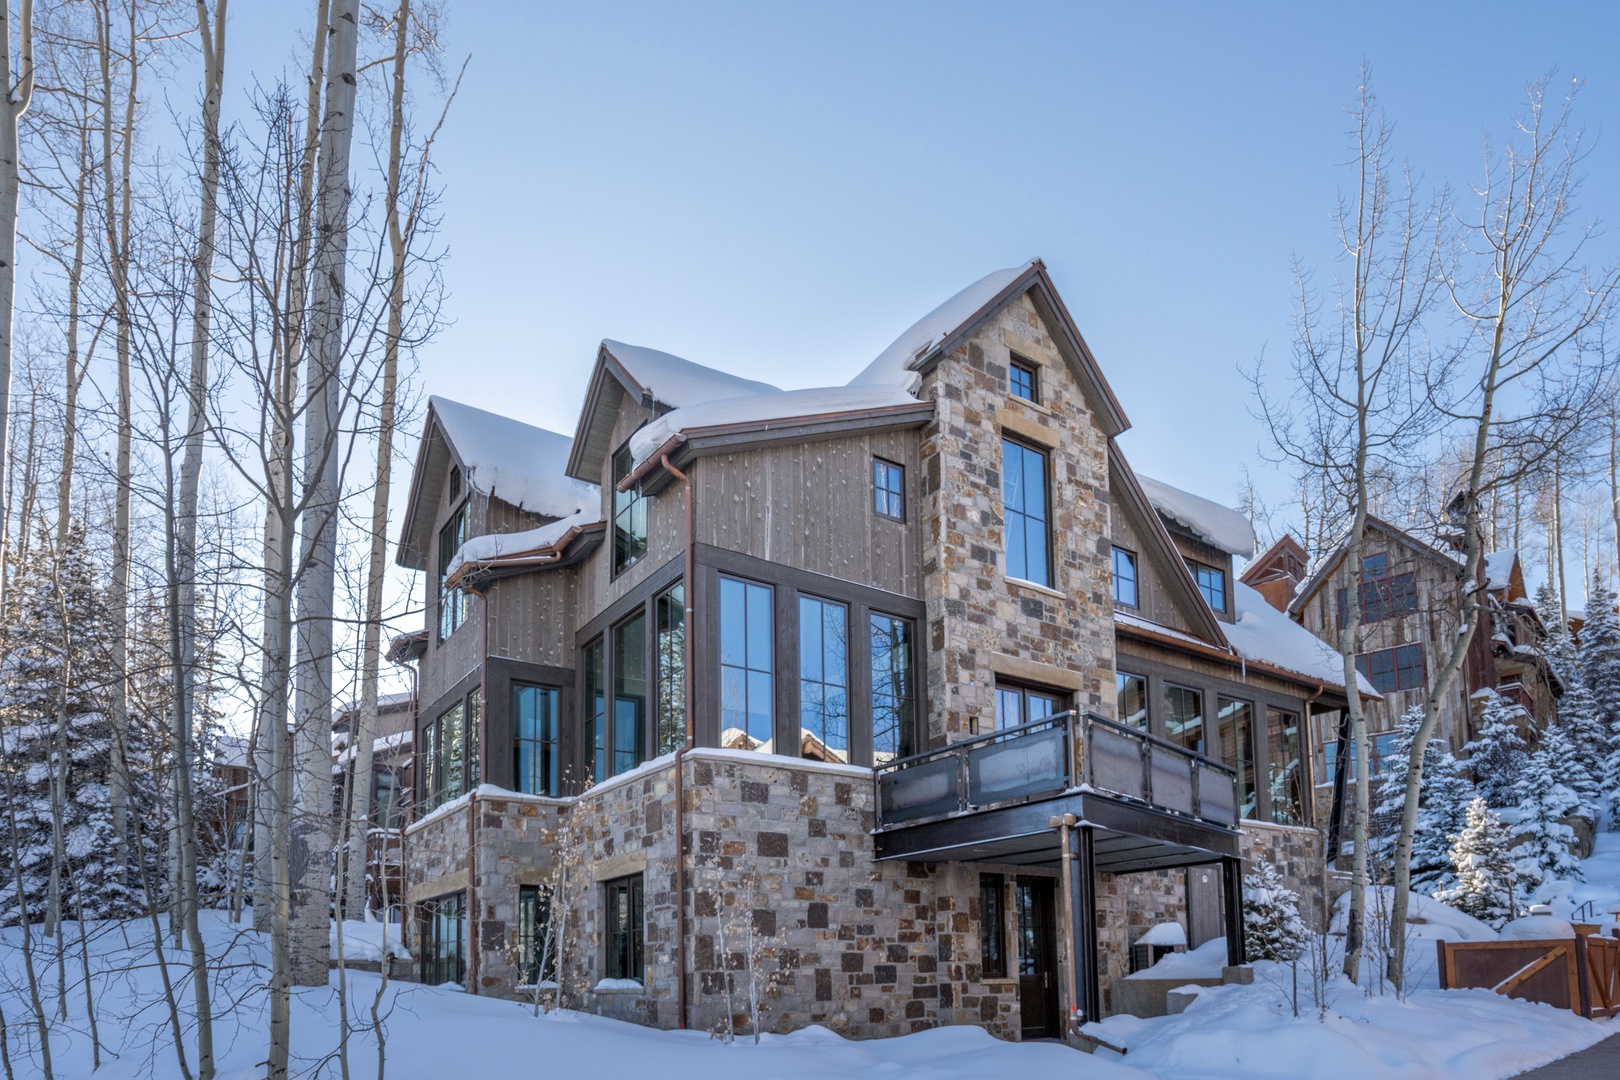 North view of Double Cabins Ski Haus by Curate Telluride